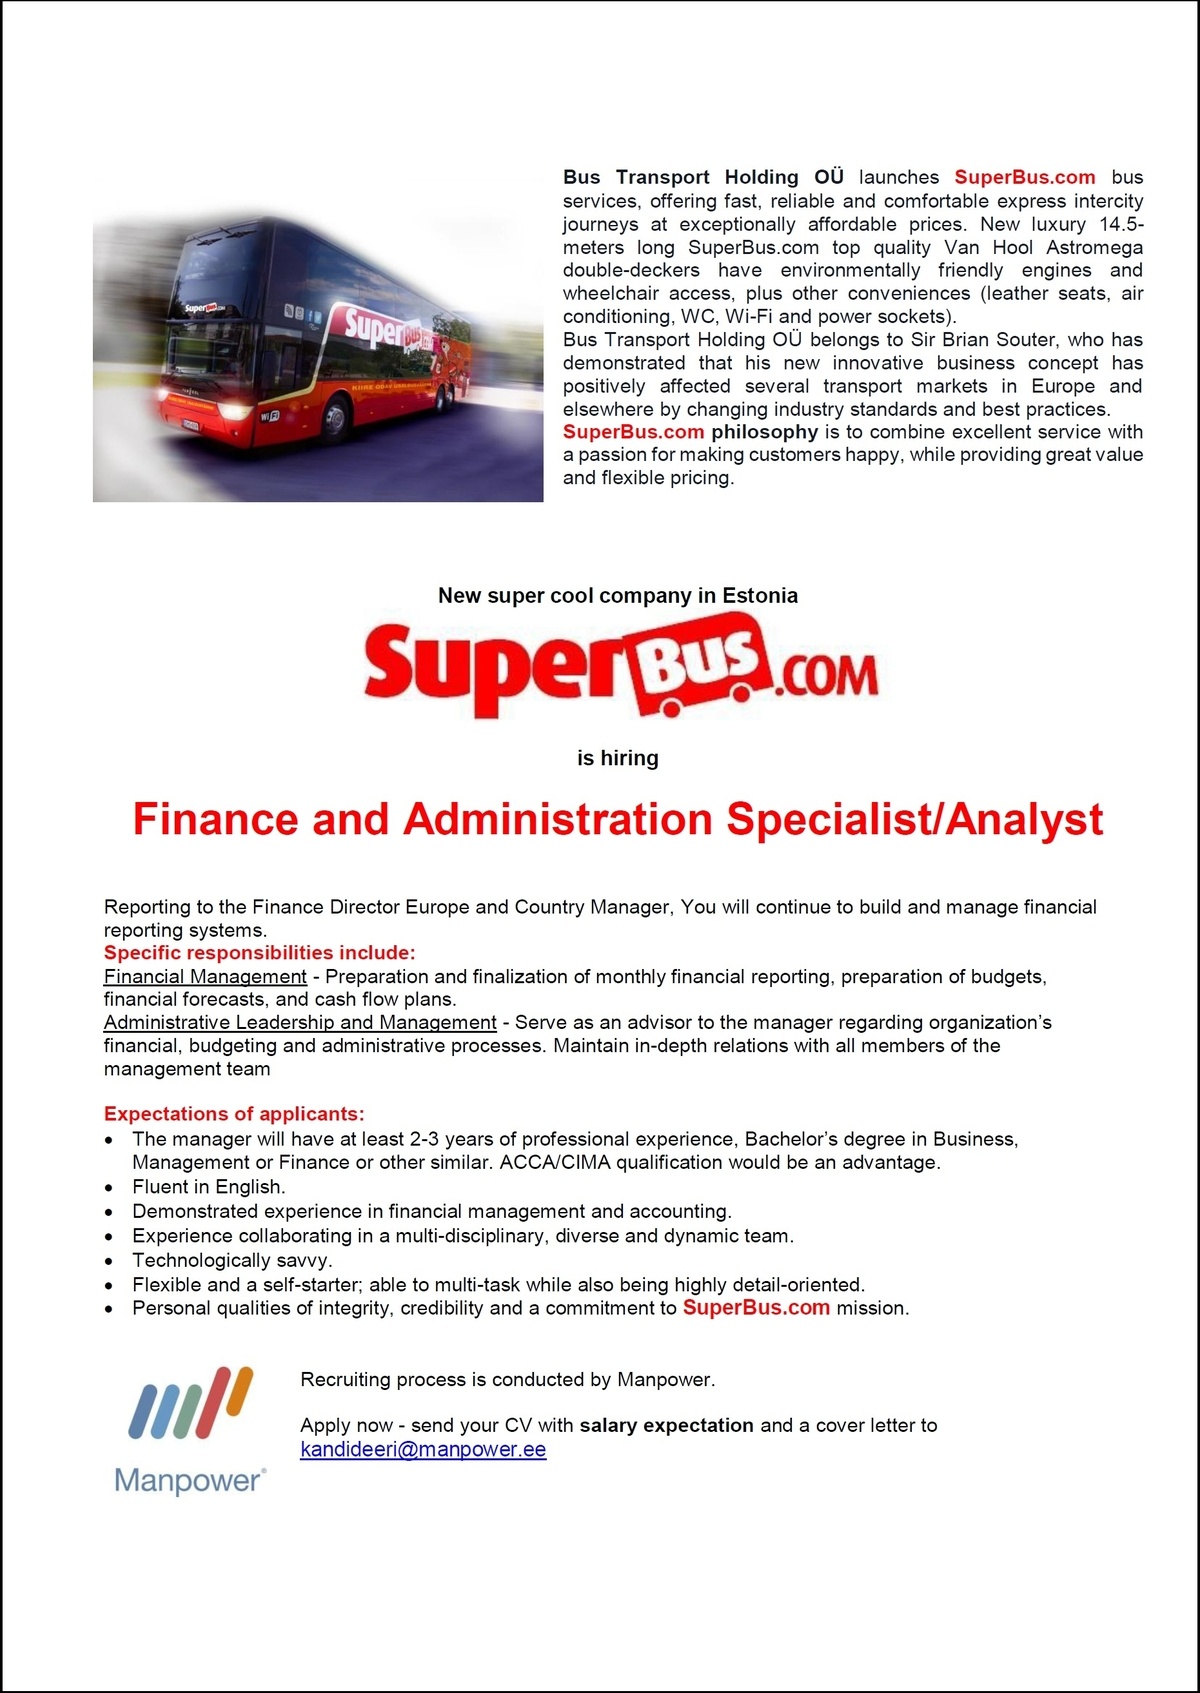 Manpower OÜ Finance and Administration Specialist/Analyst